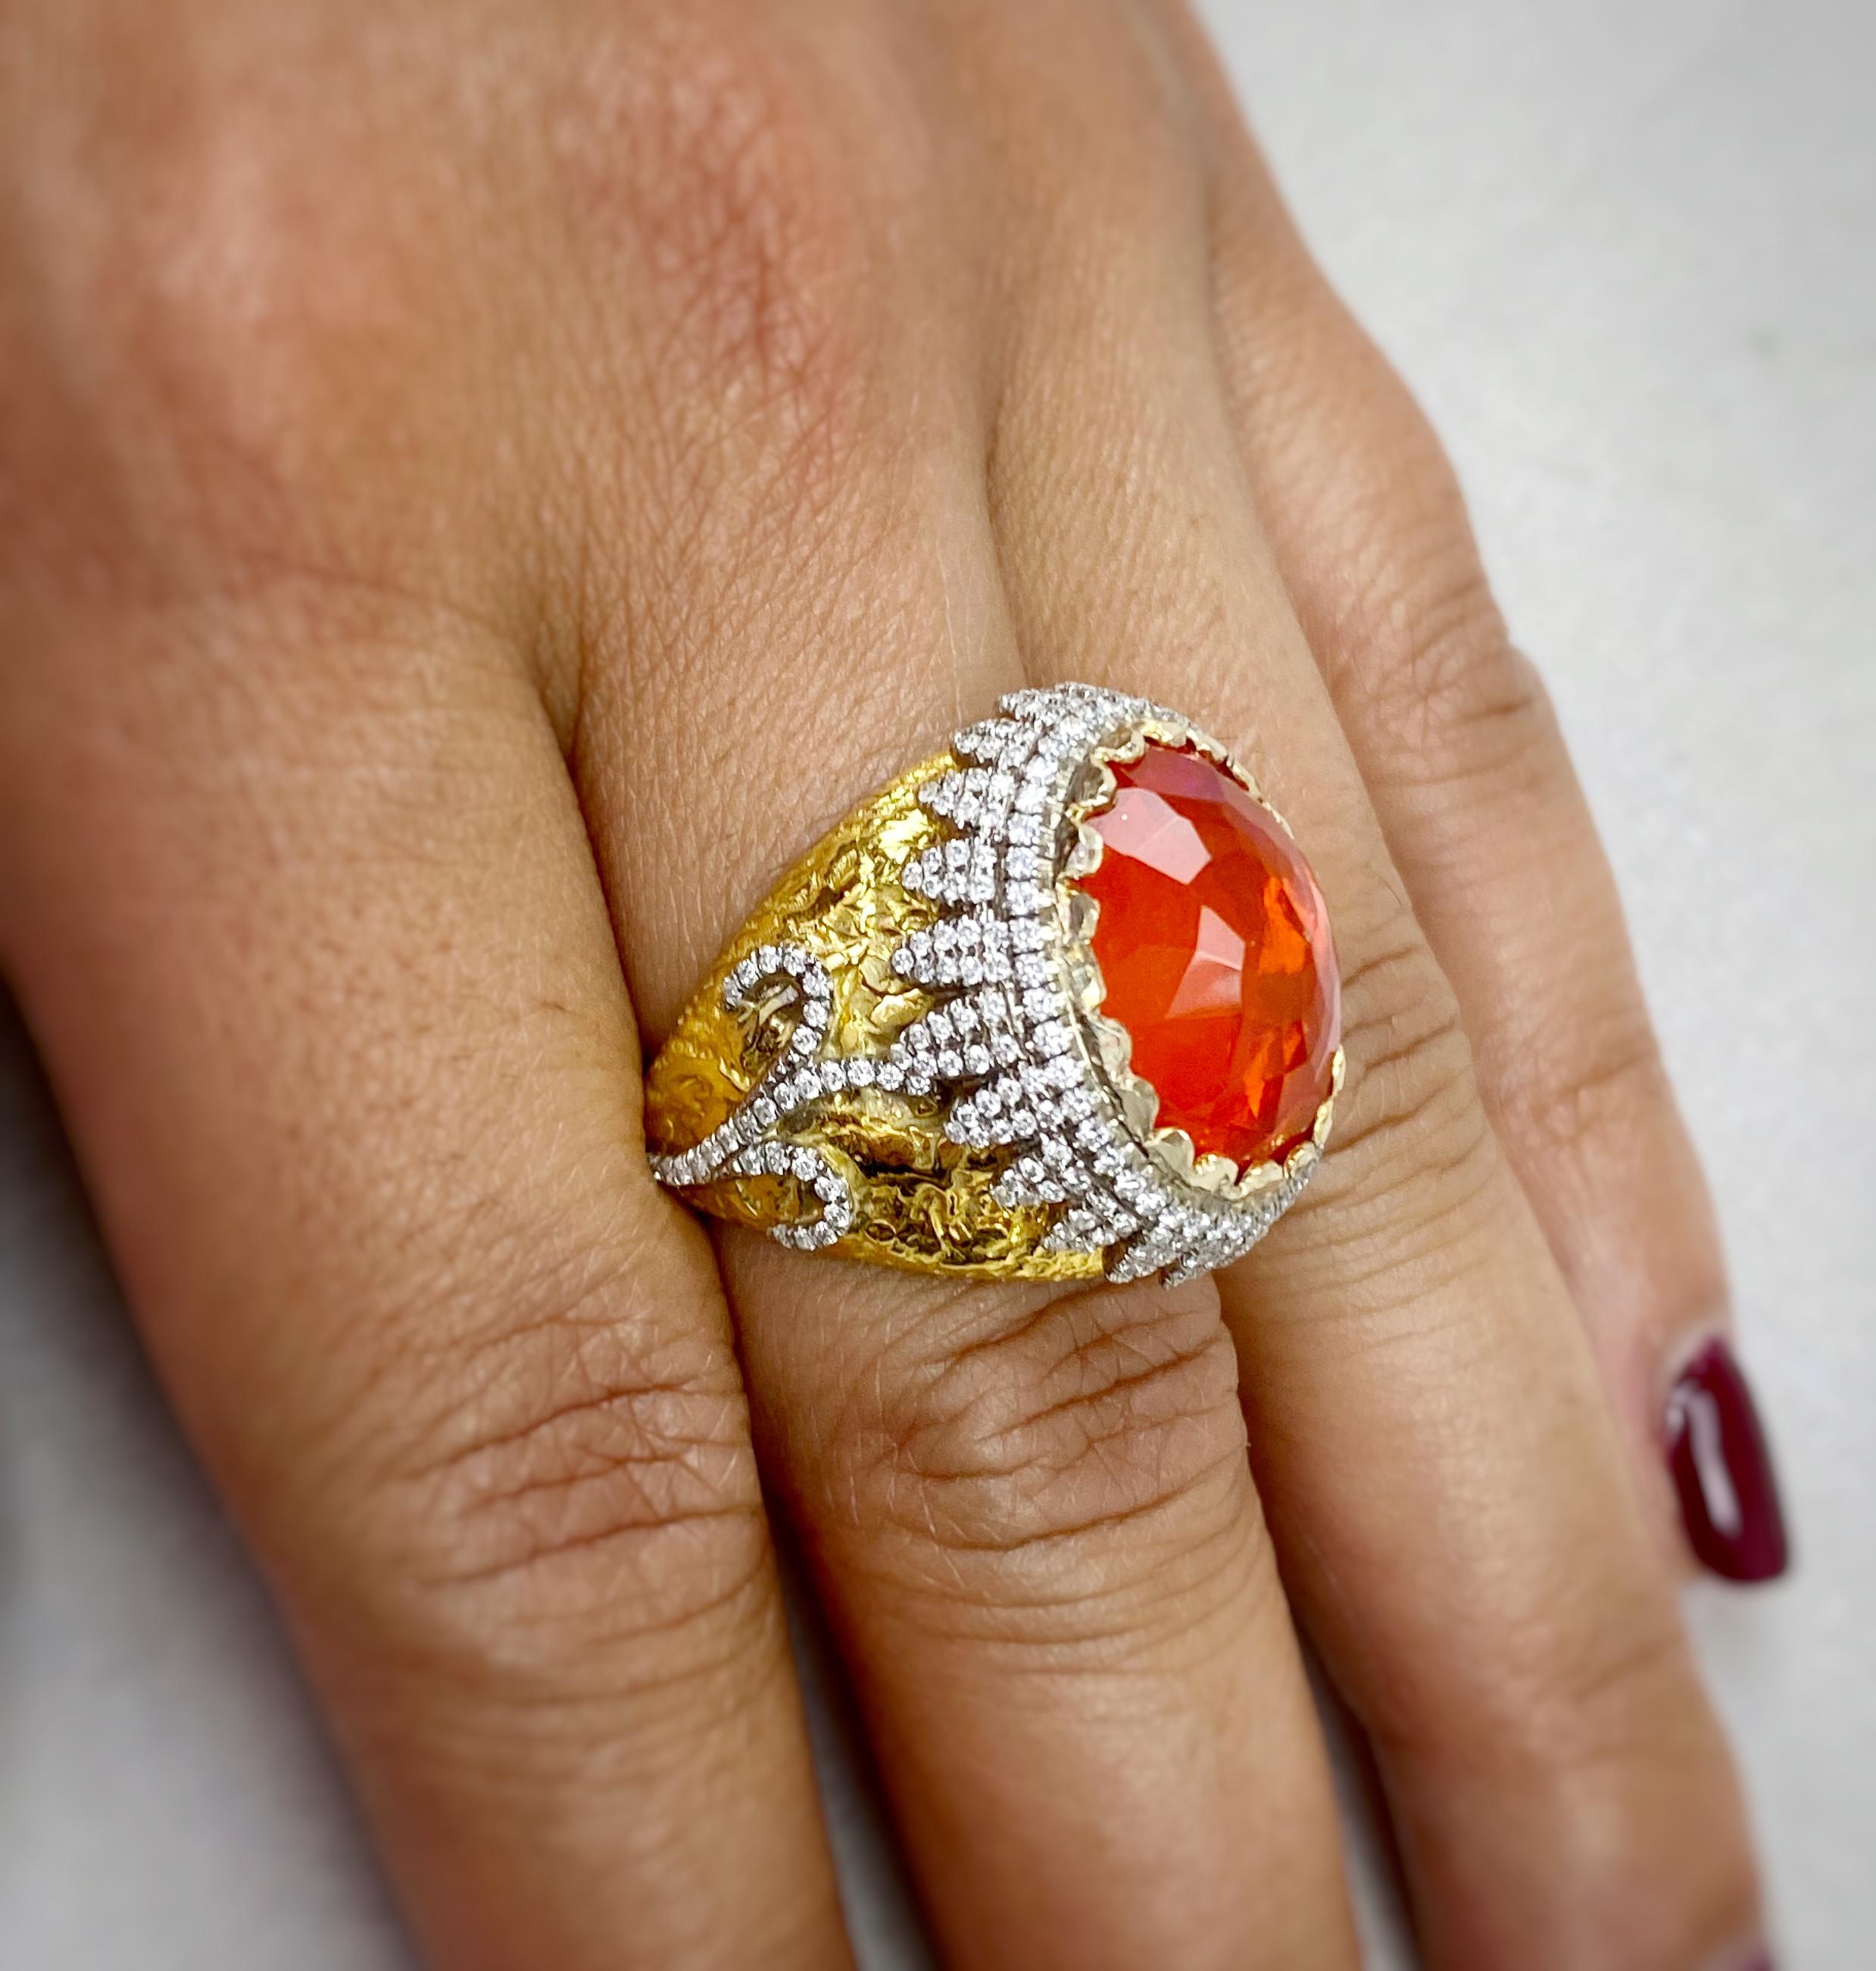 This exquisite Fire Opal and Diamond Ring features a 5.79 carat Mexican Fire Opal accented with 1.11 carats of fully faceted Diamond accents. The Fire Opal is reverse set in this hand made setting of hammered, solid 18K yellow Gold and 18k white